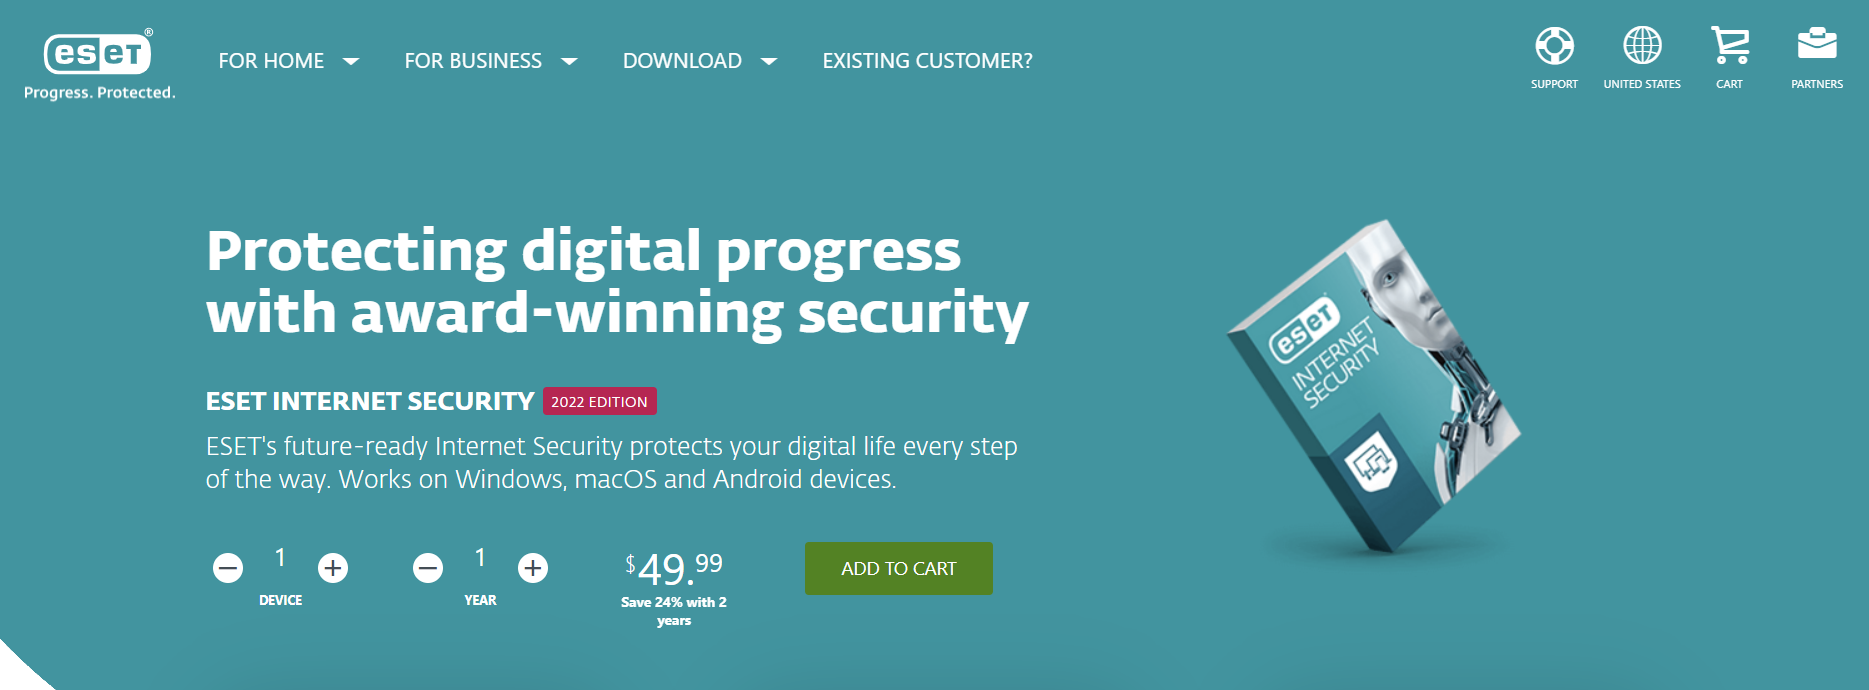 ESET is a global digital security company that develops software solutions. 